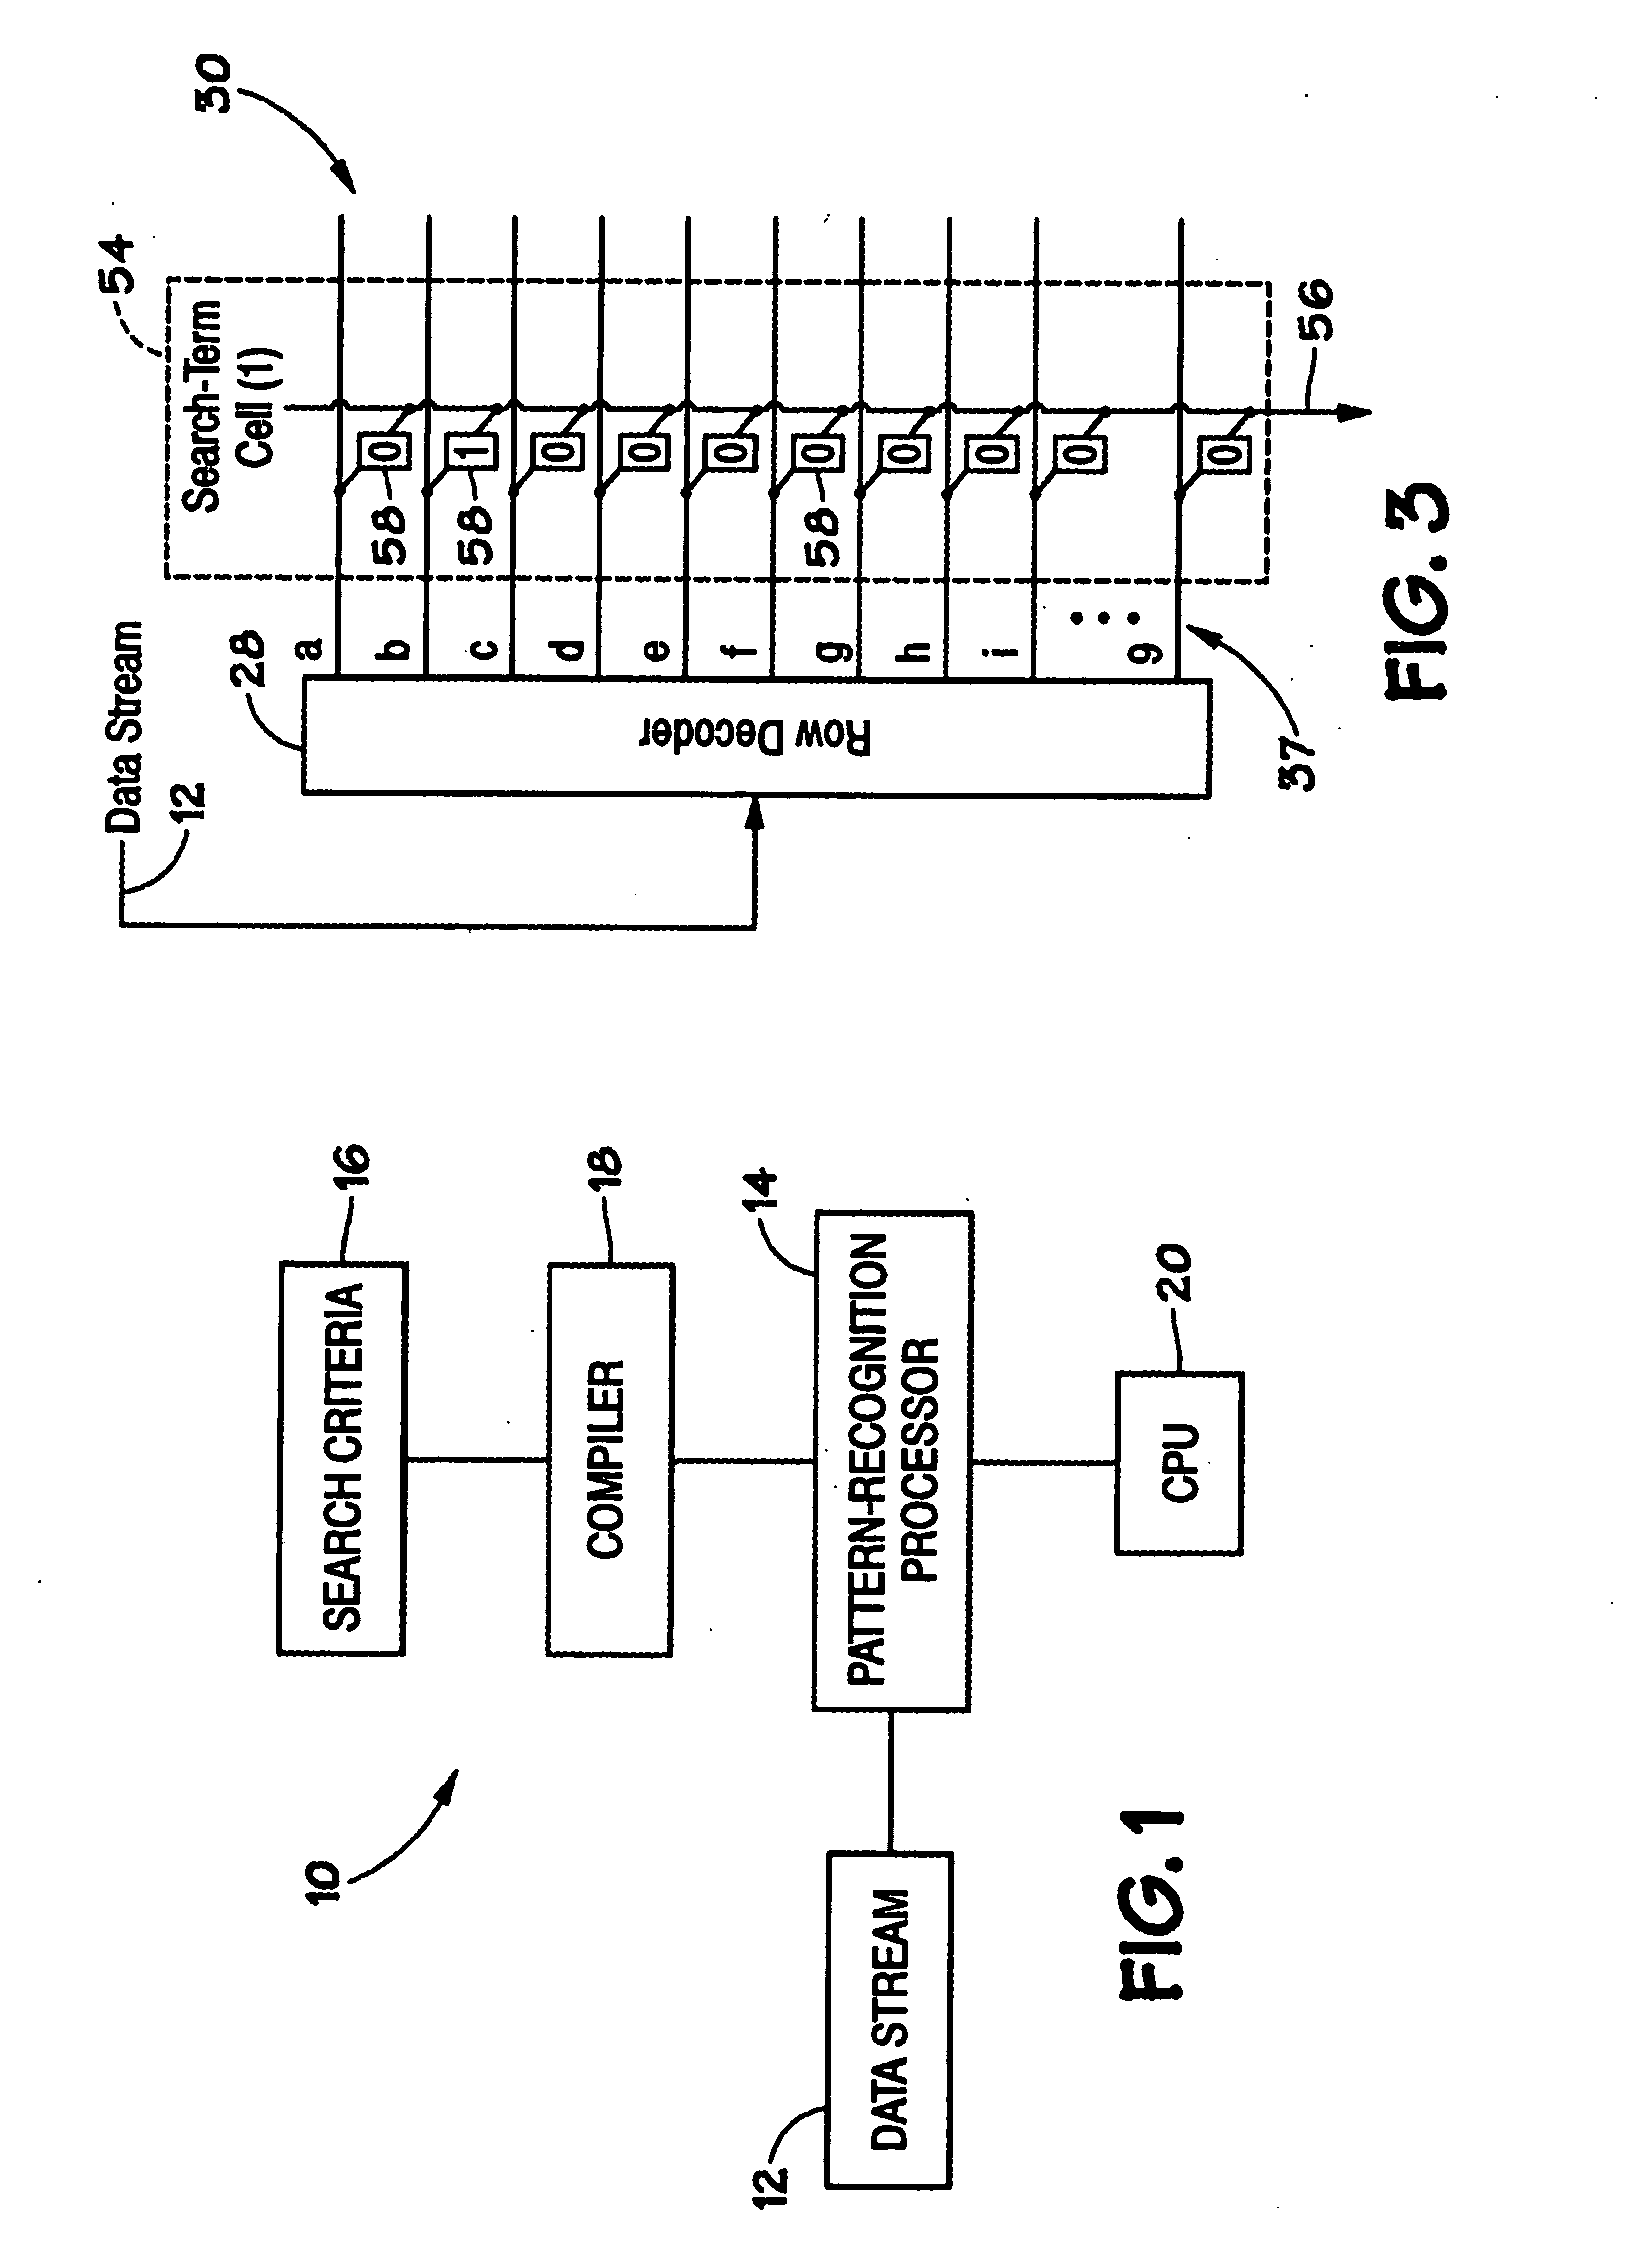 Devices, systems, and methods to synchronize simultaneous DMA parallel processing of a single data stream by multiple devices